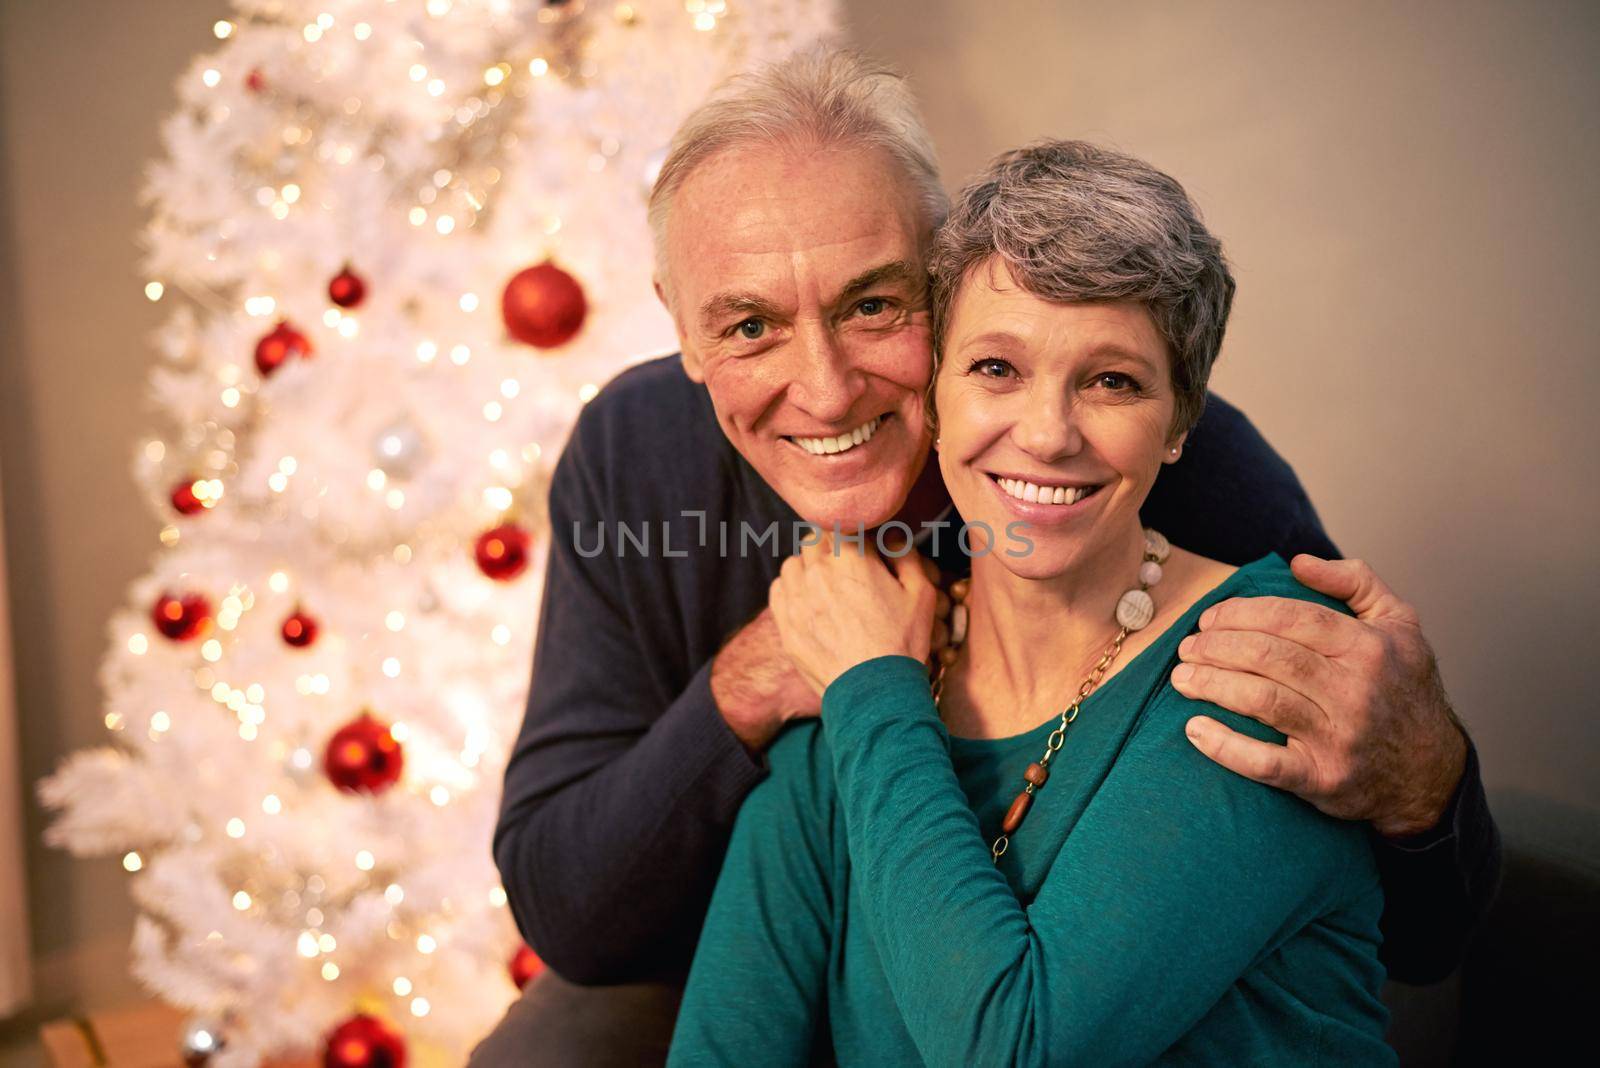 Its Christmas in the heart that puts Christmas in the air. Cropped portrait of a happy mature couple beside a Christmas tree